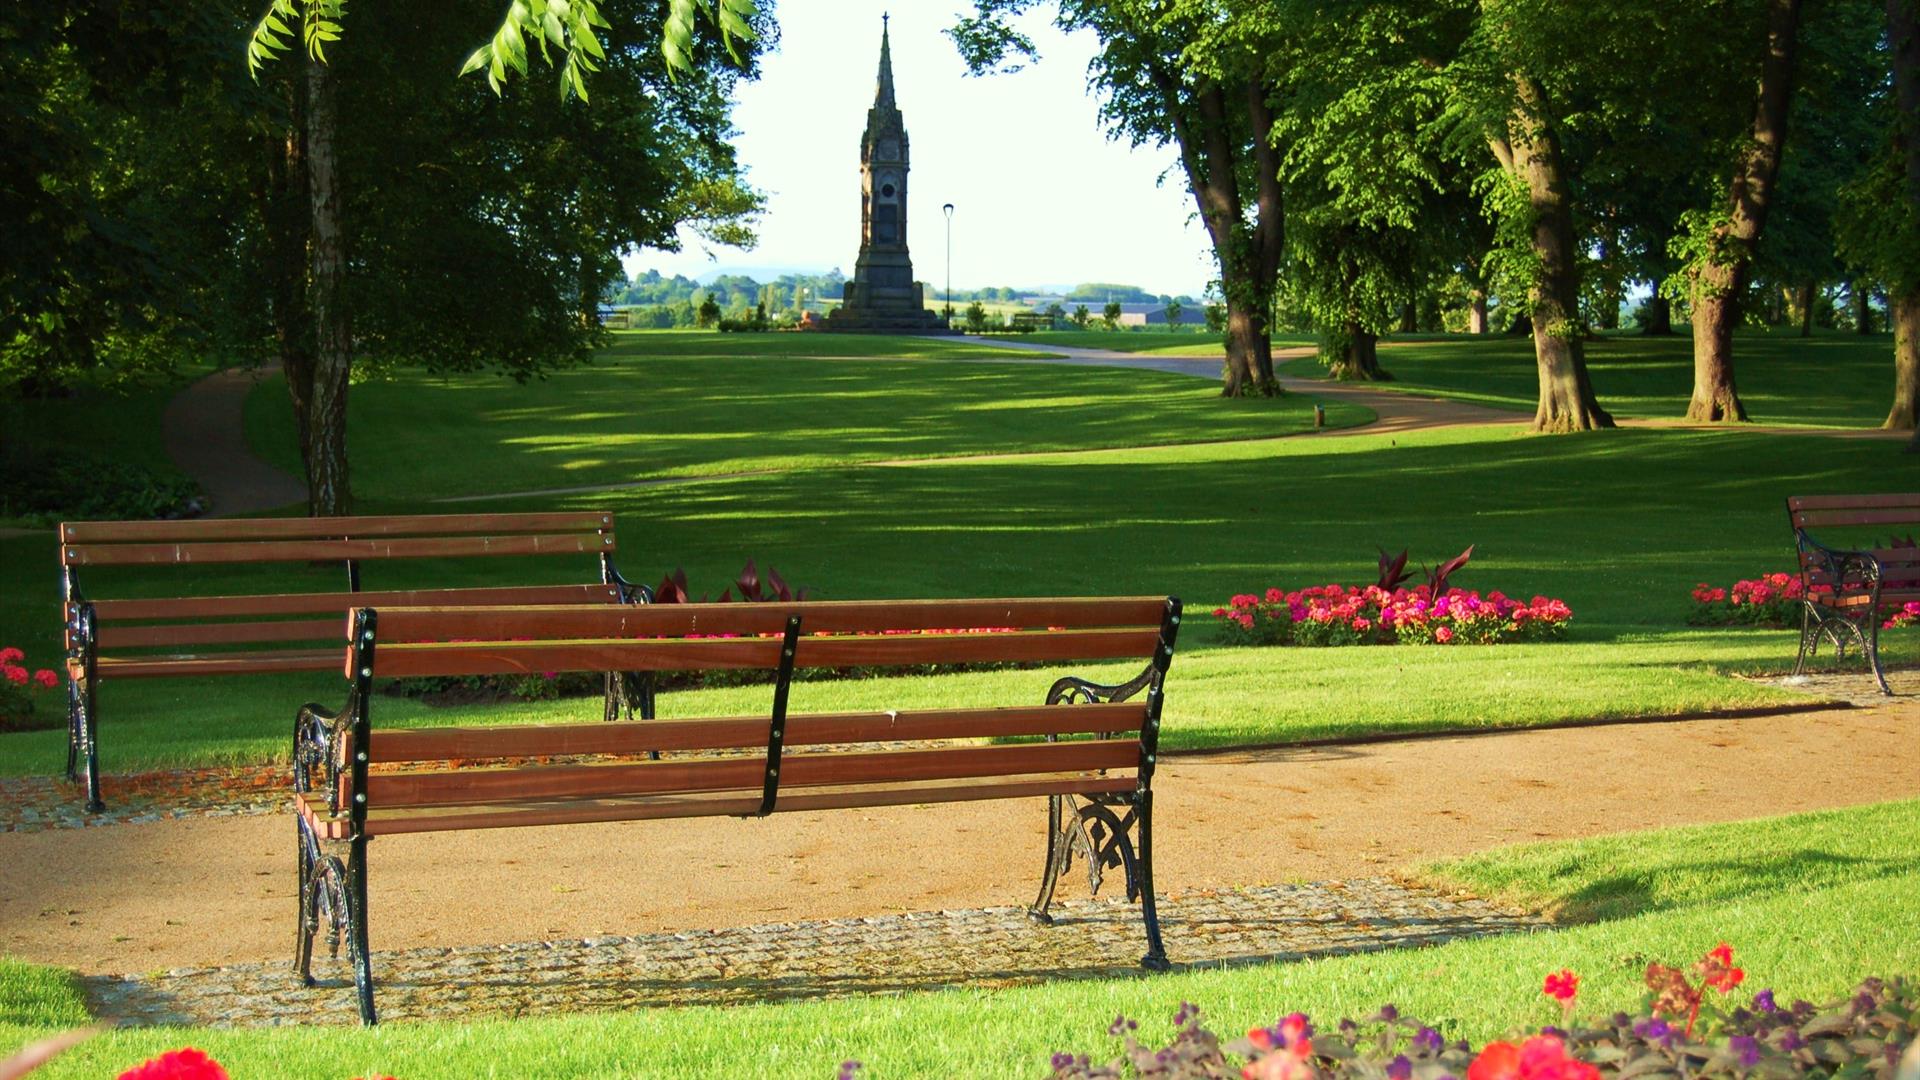 Image is of 2 park benches in the grounds of Castle Gardens in Lisburn